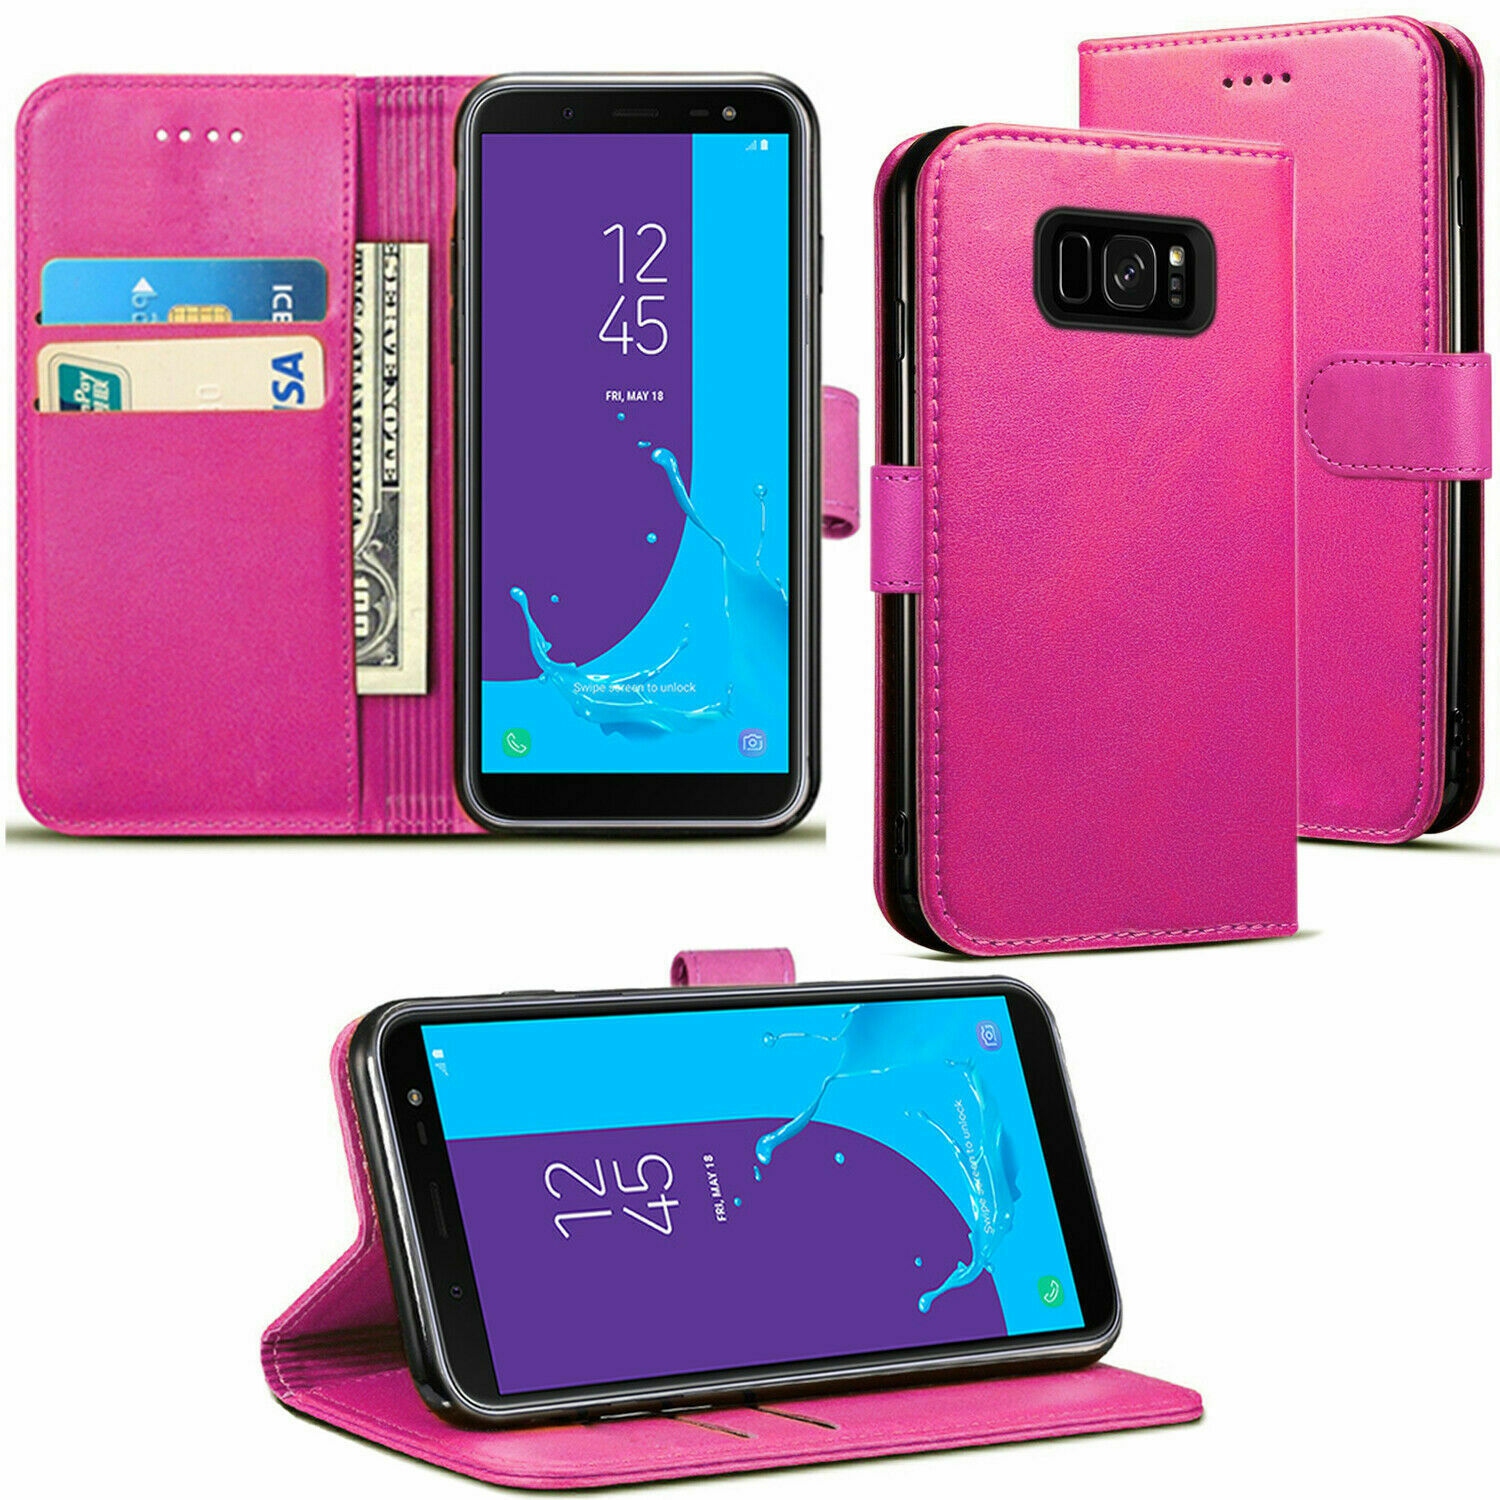 【CSmart】 Magnetic Card Slot Leather Folio Wallet Flip Case Cover for Samsung Galaxy S7, Hot Pink